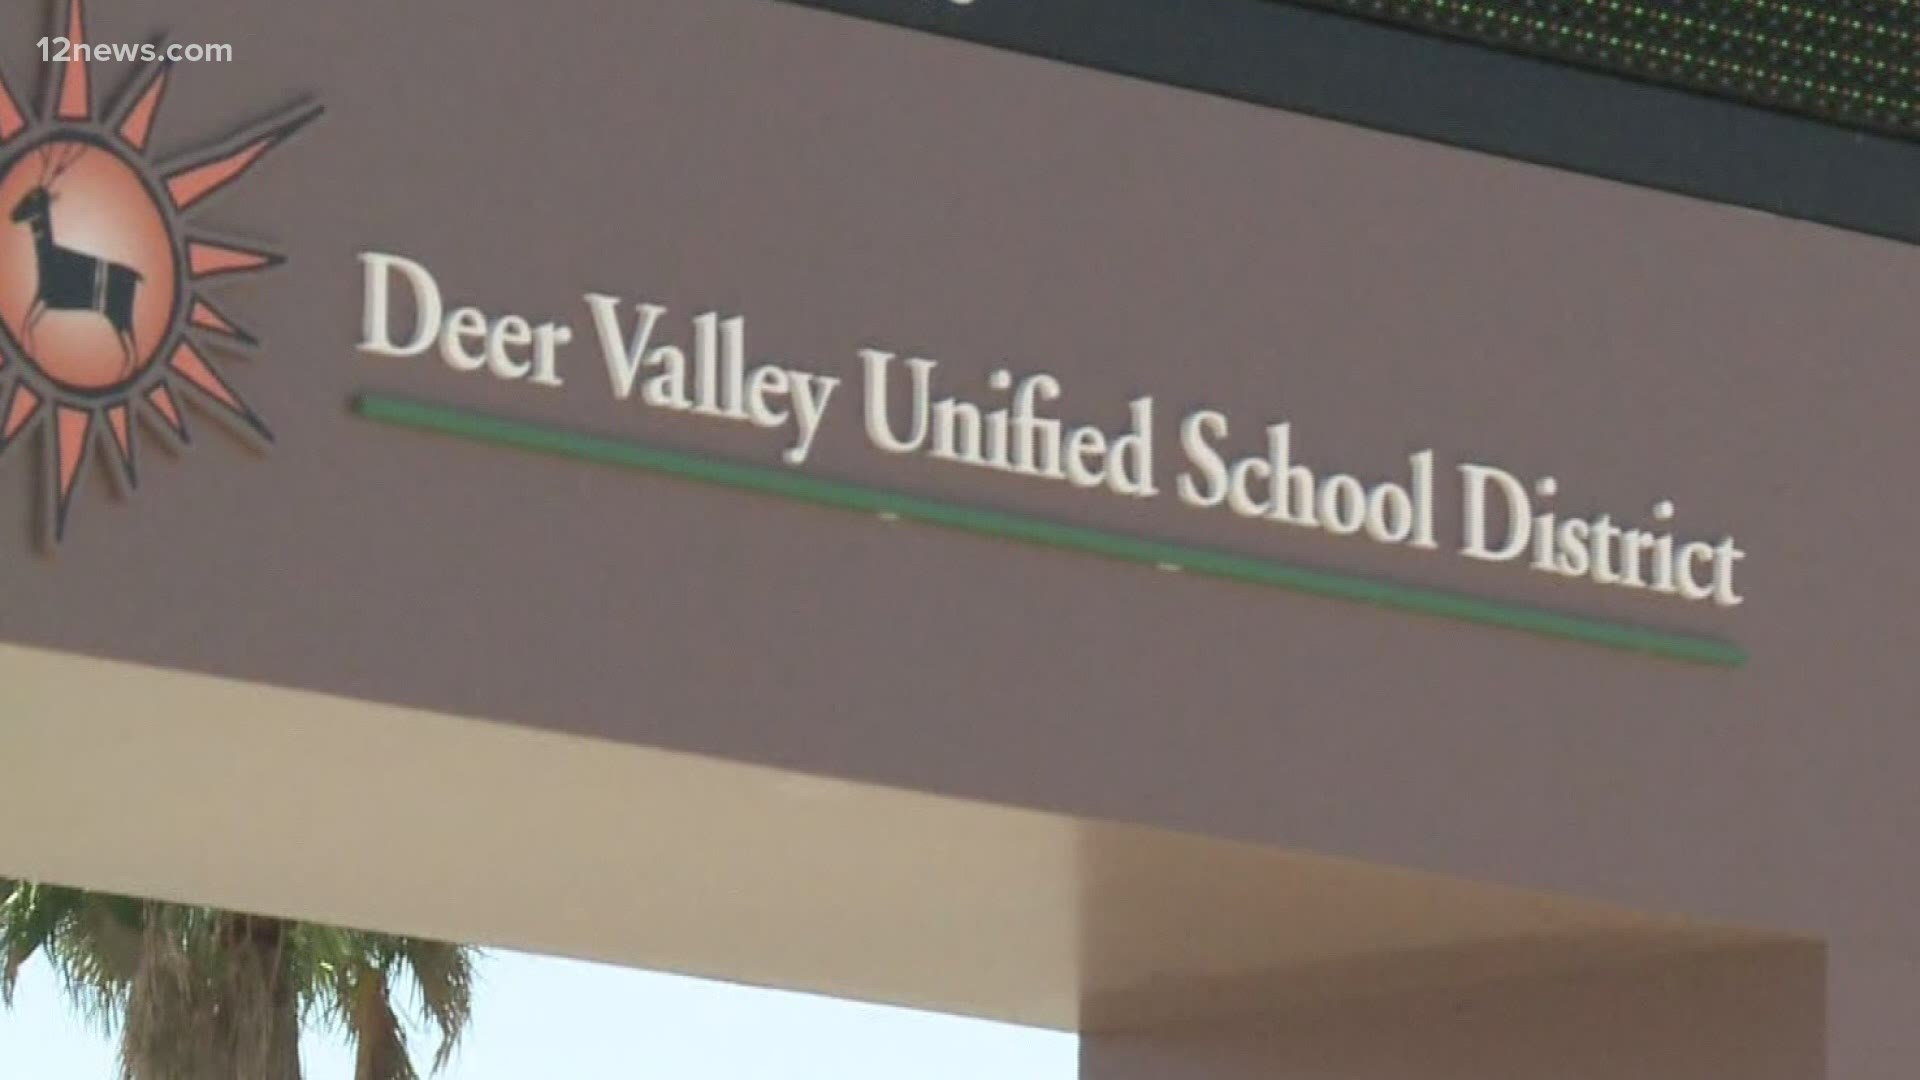 A mom is concerned about a Deer Valley Unified School District waiver she's being asked to sign so her son can attend summer band camp. A lawyer says, don't sign it.